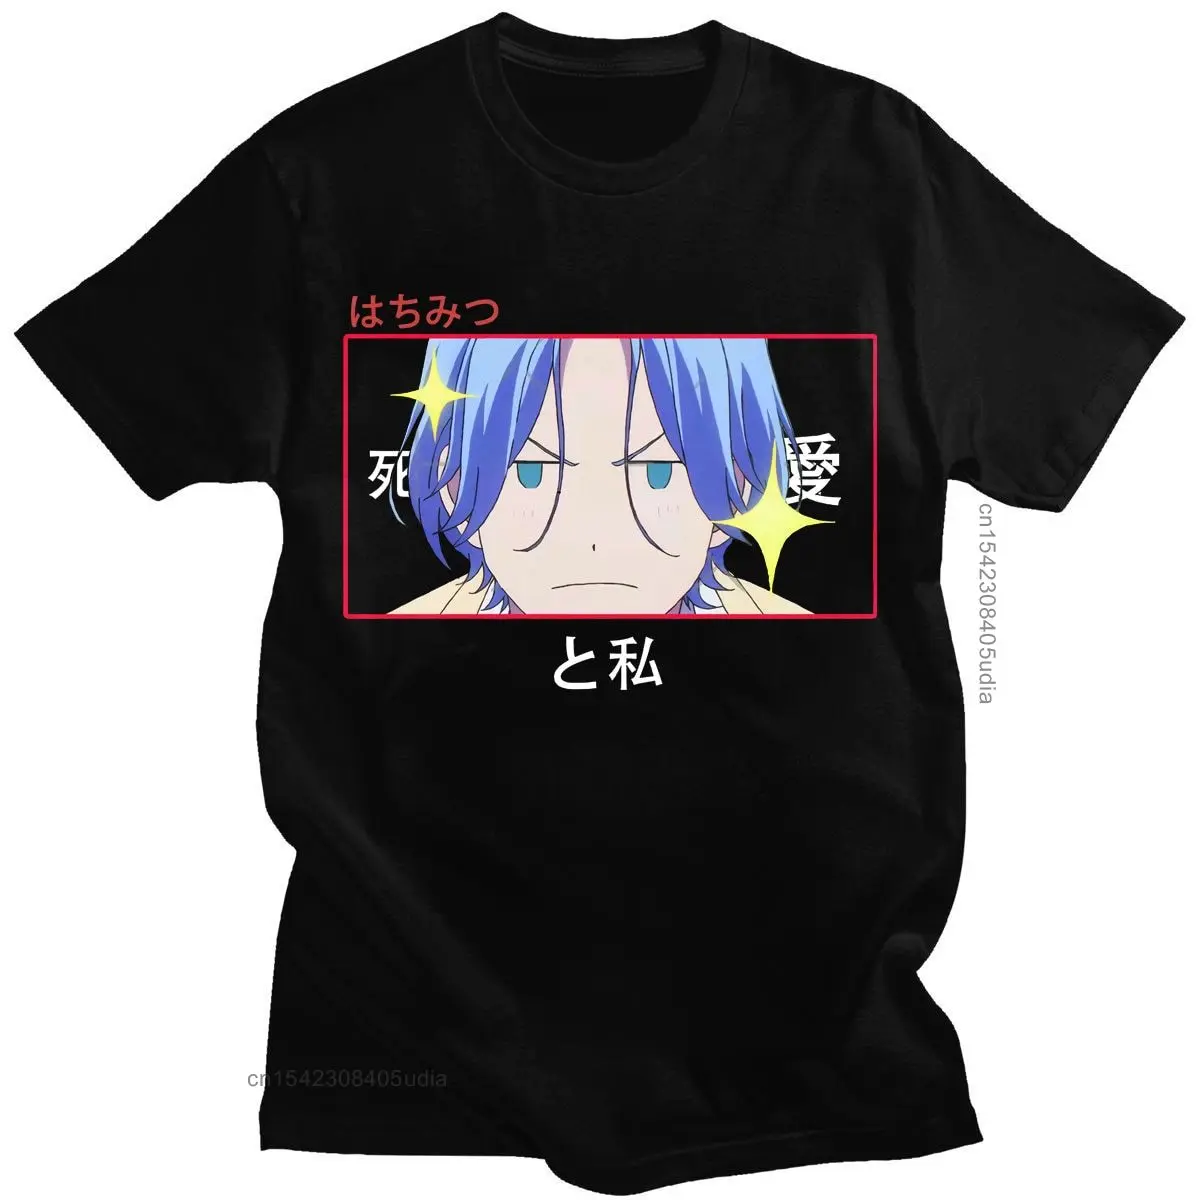 Anime Sk8 The Aesthetic New Arrivals T-Shirt Cool Hip Hop Unisex Tshirt Spring Summer Men's Fashion Loose Short Sleeves